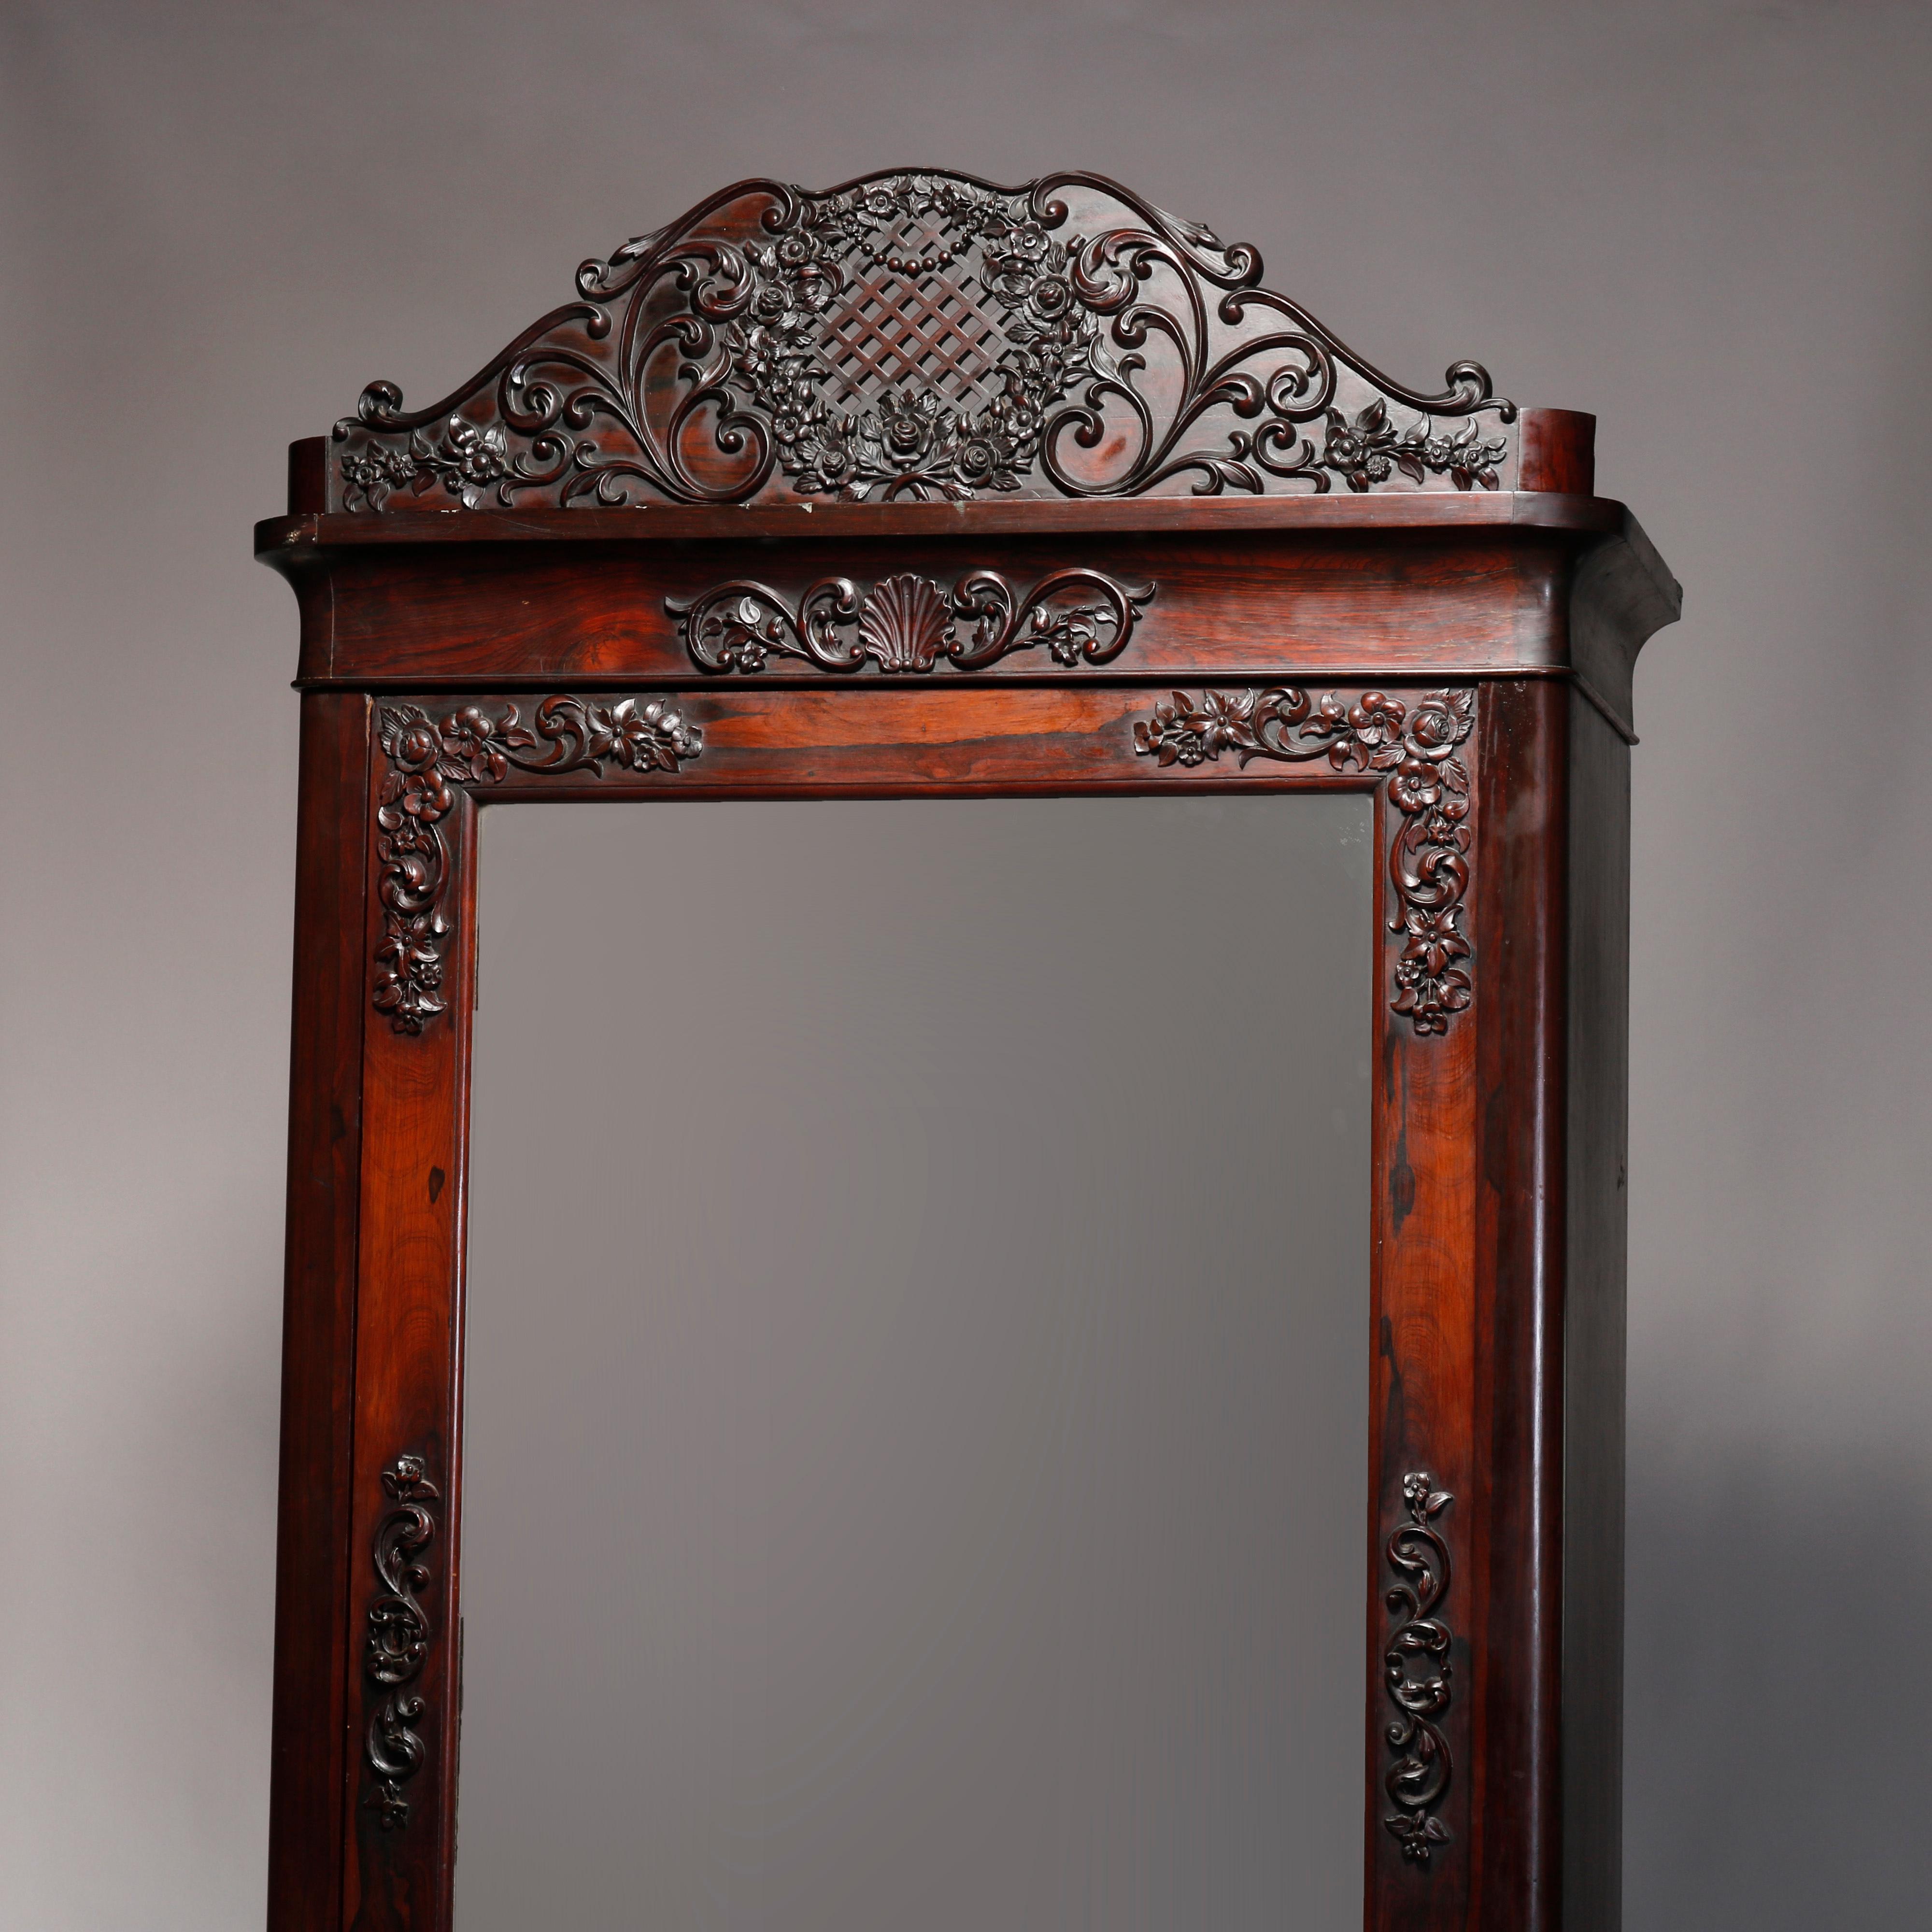 An antique Rococo Revival armoire offers rosewood construction with carved crest having scroll, floral and foliate elements surmounting single mirrored door case and lower drawer, circa 1860

Measures: 93.5